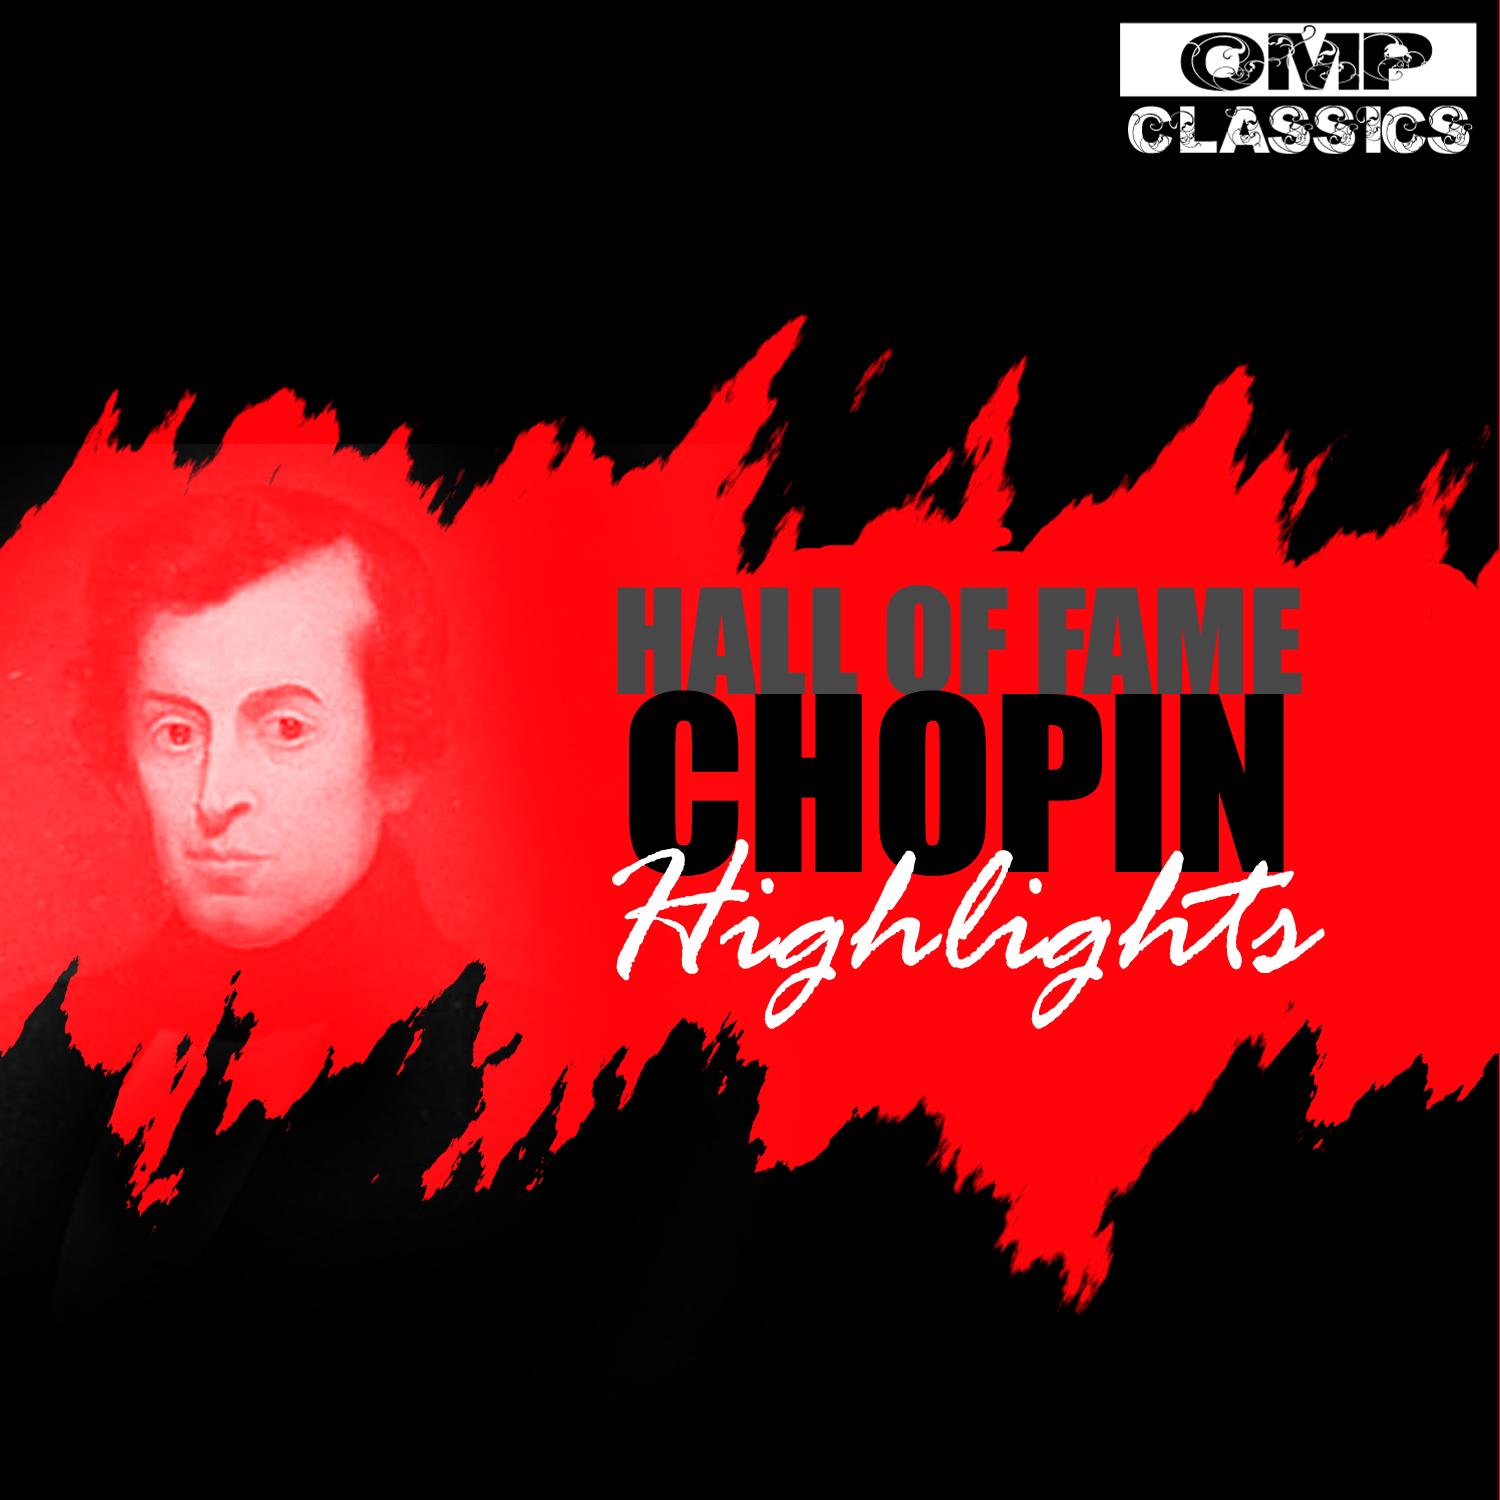 Hall of Fame: Chopin Highlights